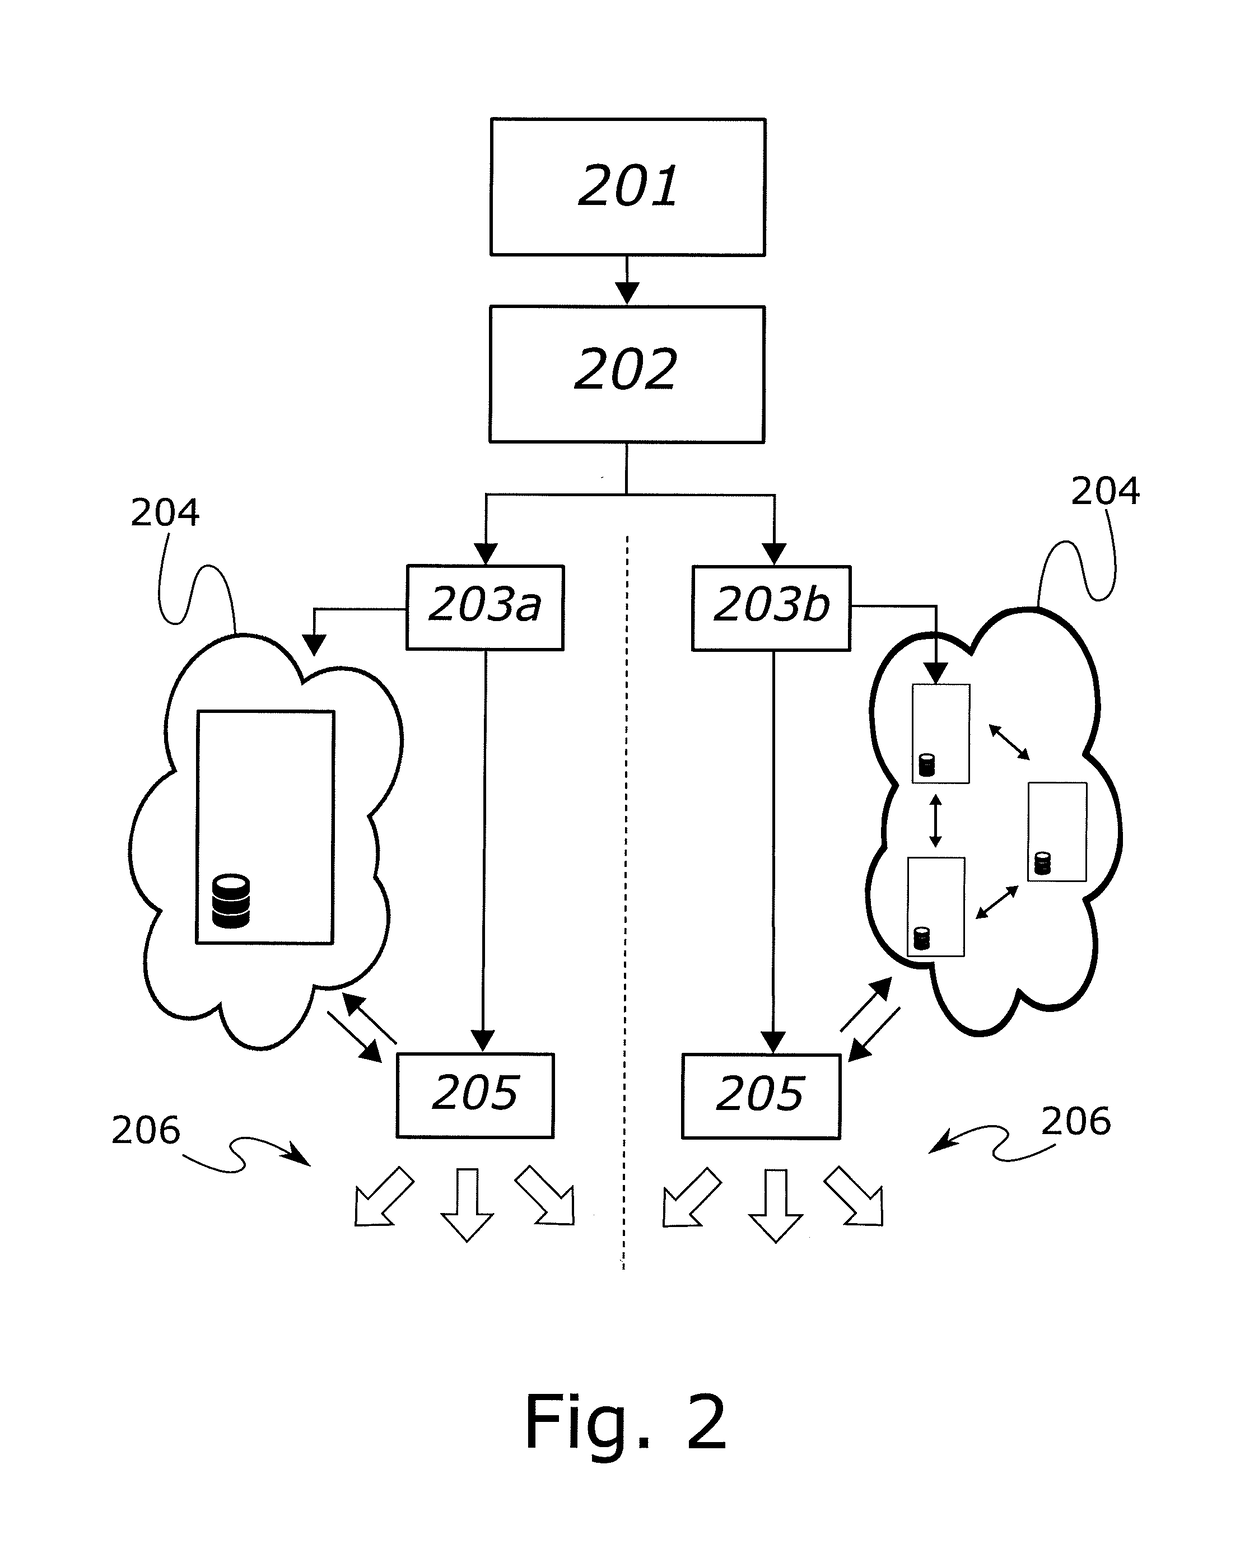 Distributed wireless communication system for moving vehicles